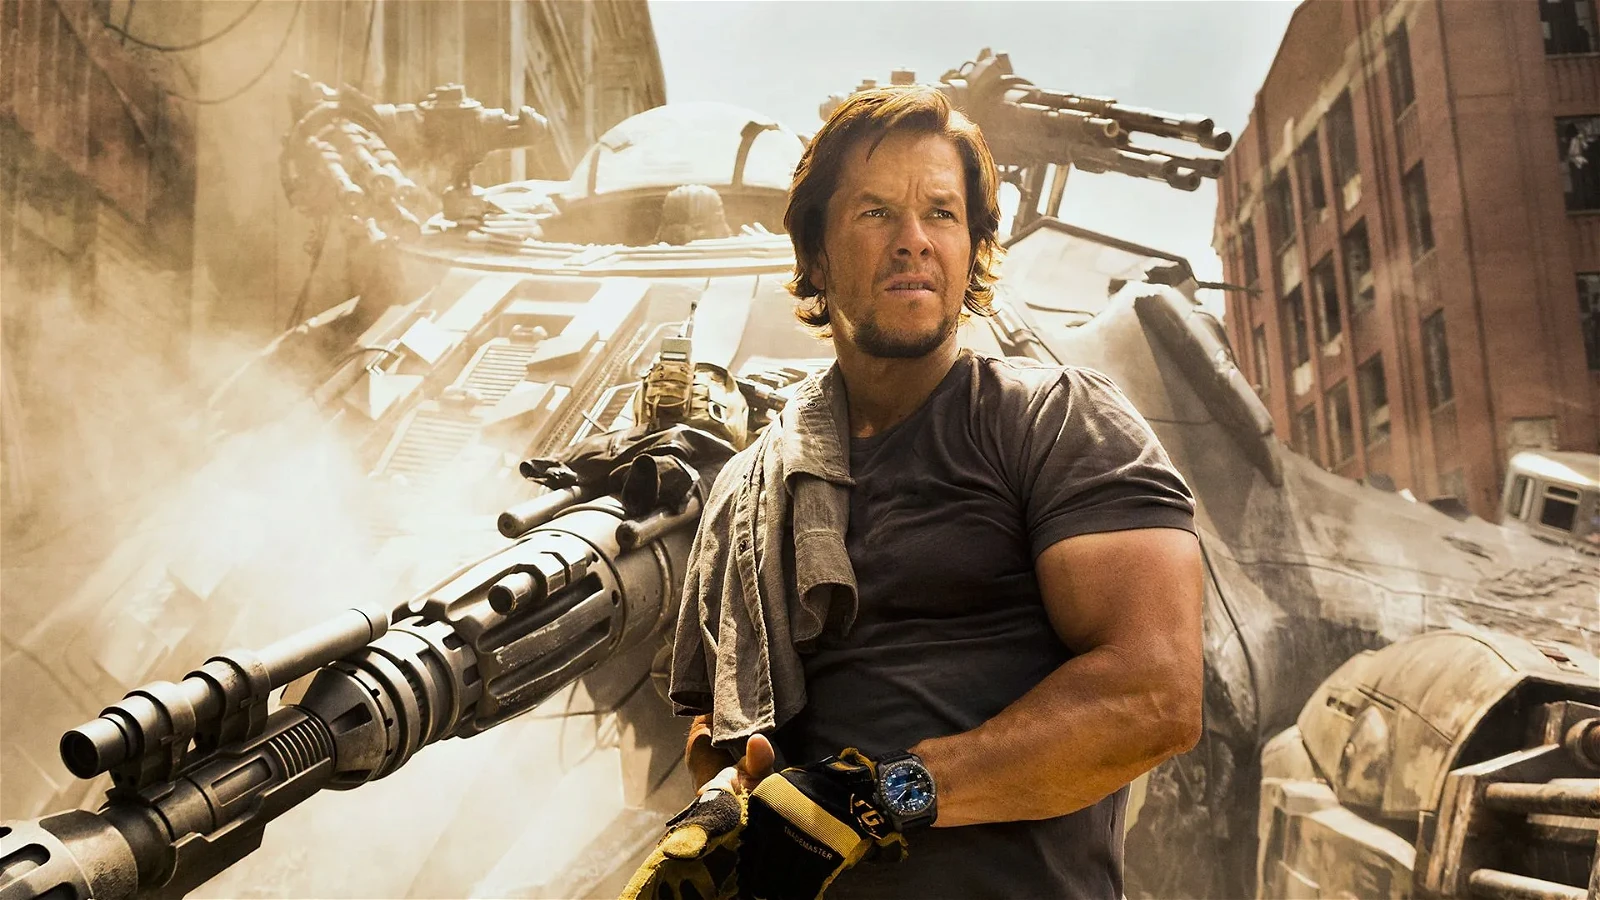 Mark Wahlberg as Cade Yeager in the Transformers franchise